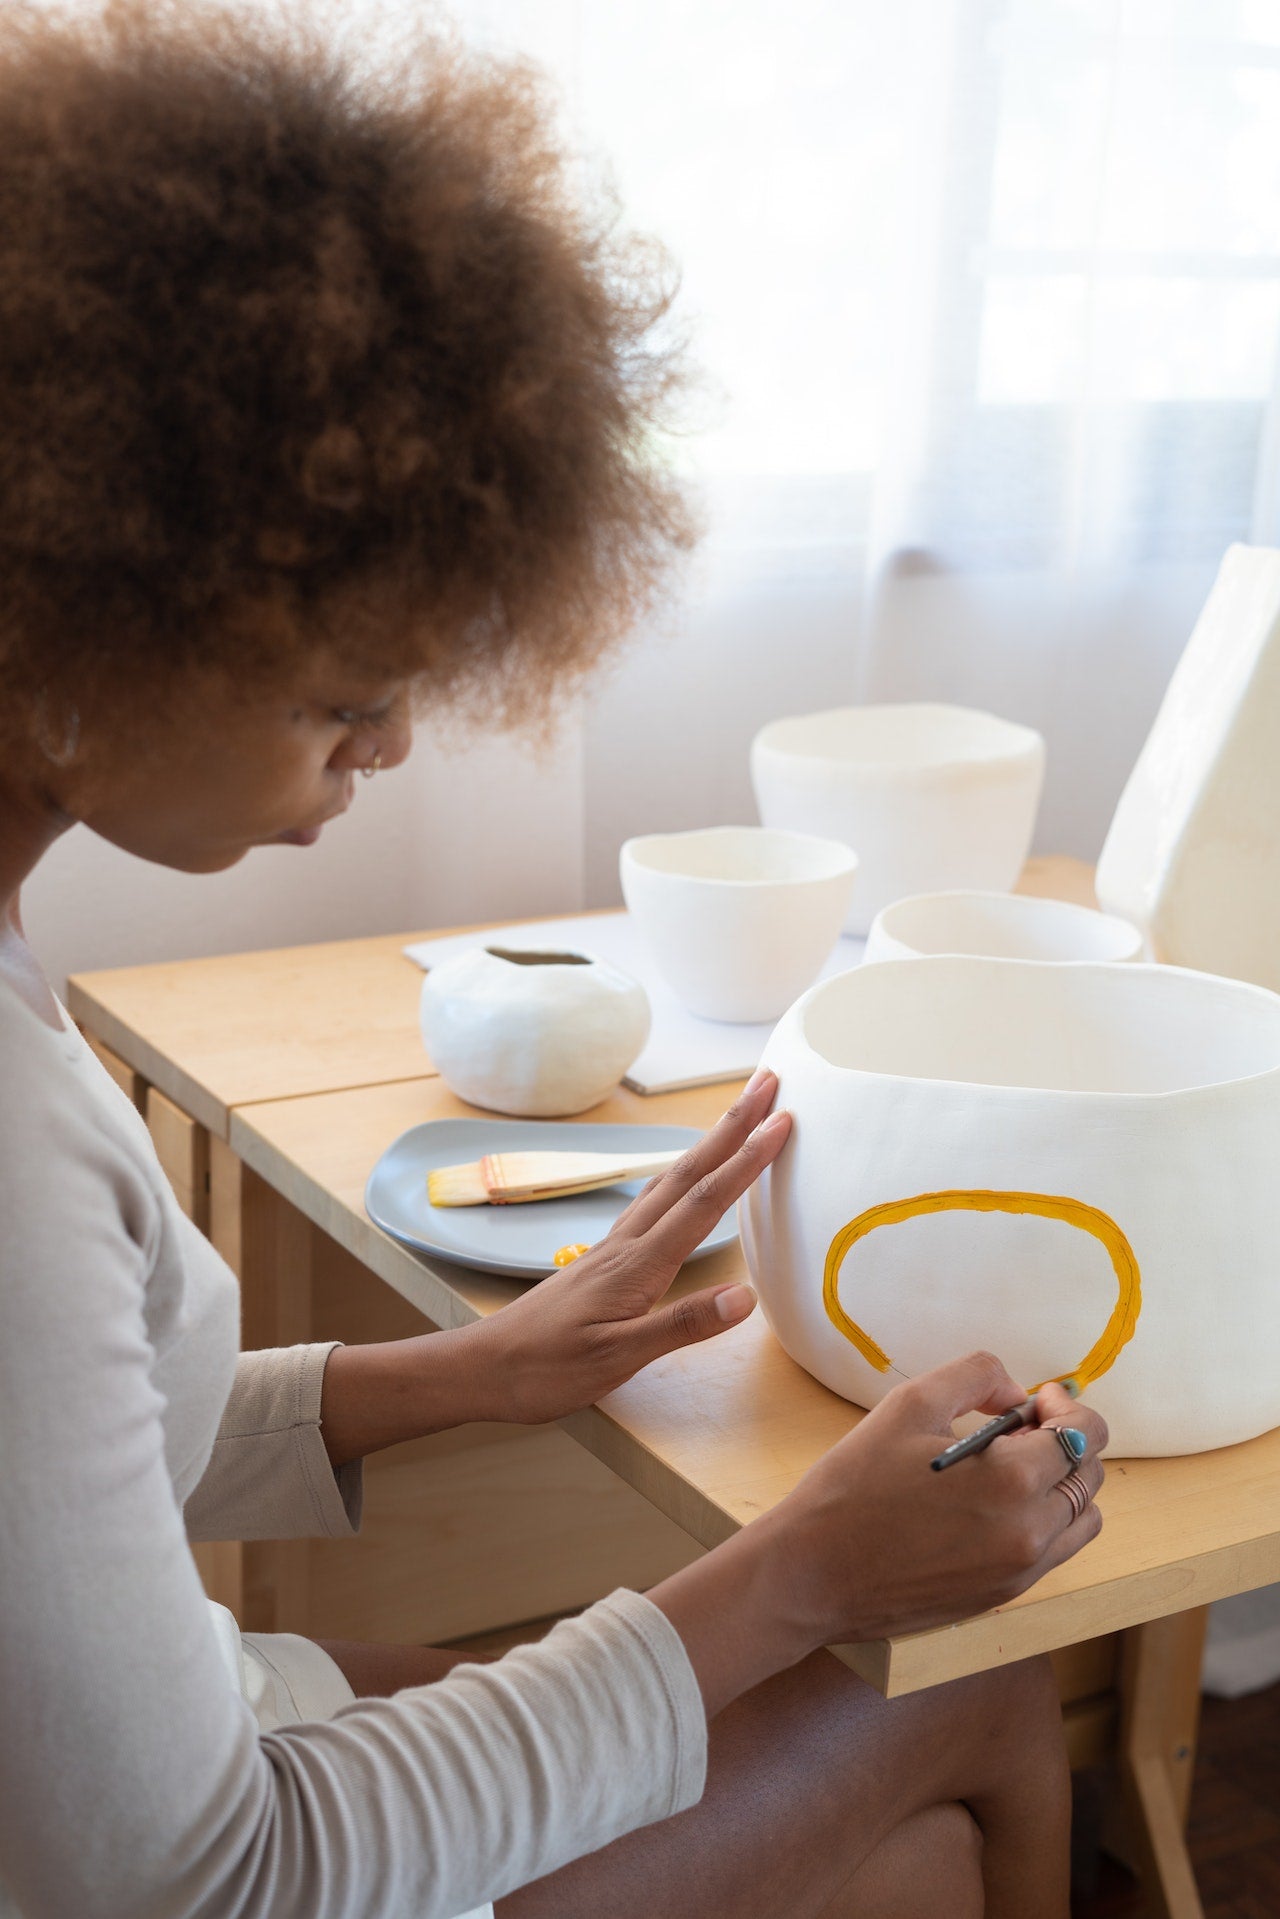 A woman sits at a table painting a gold line on a white ceramic pot